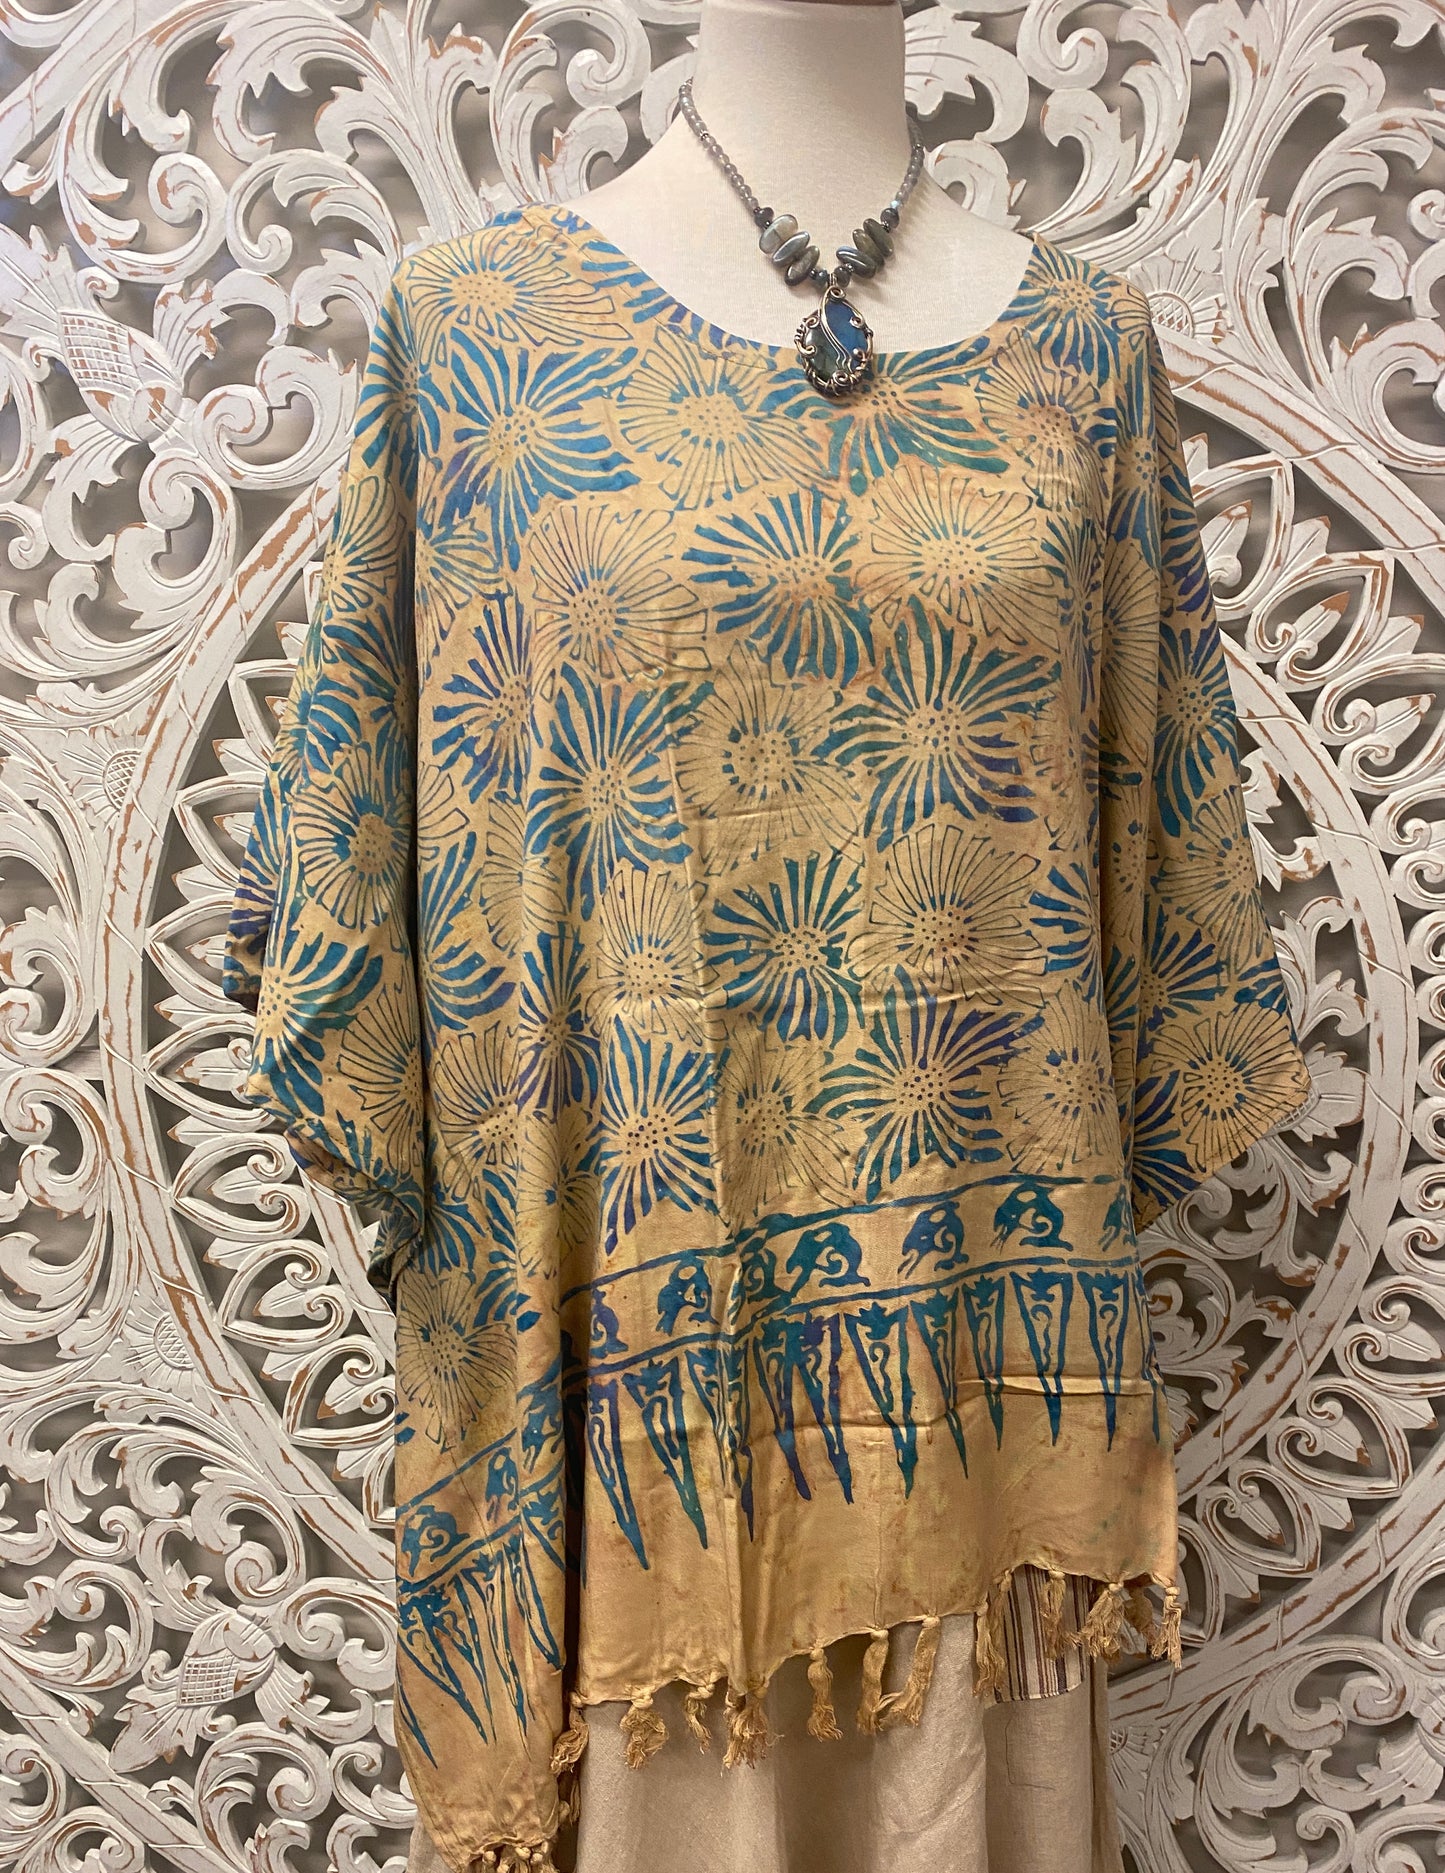 Hand Batiked Poncho top with Fringe